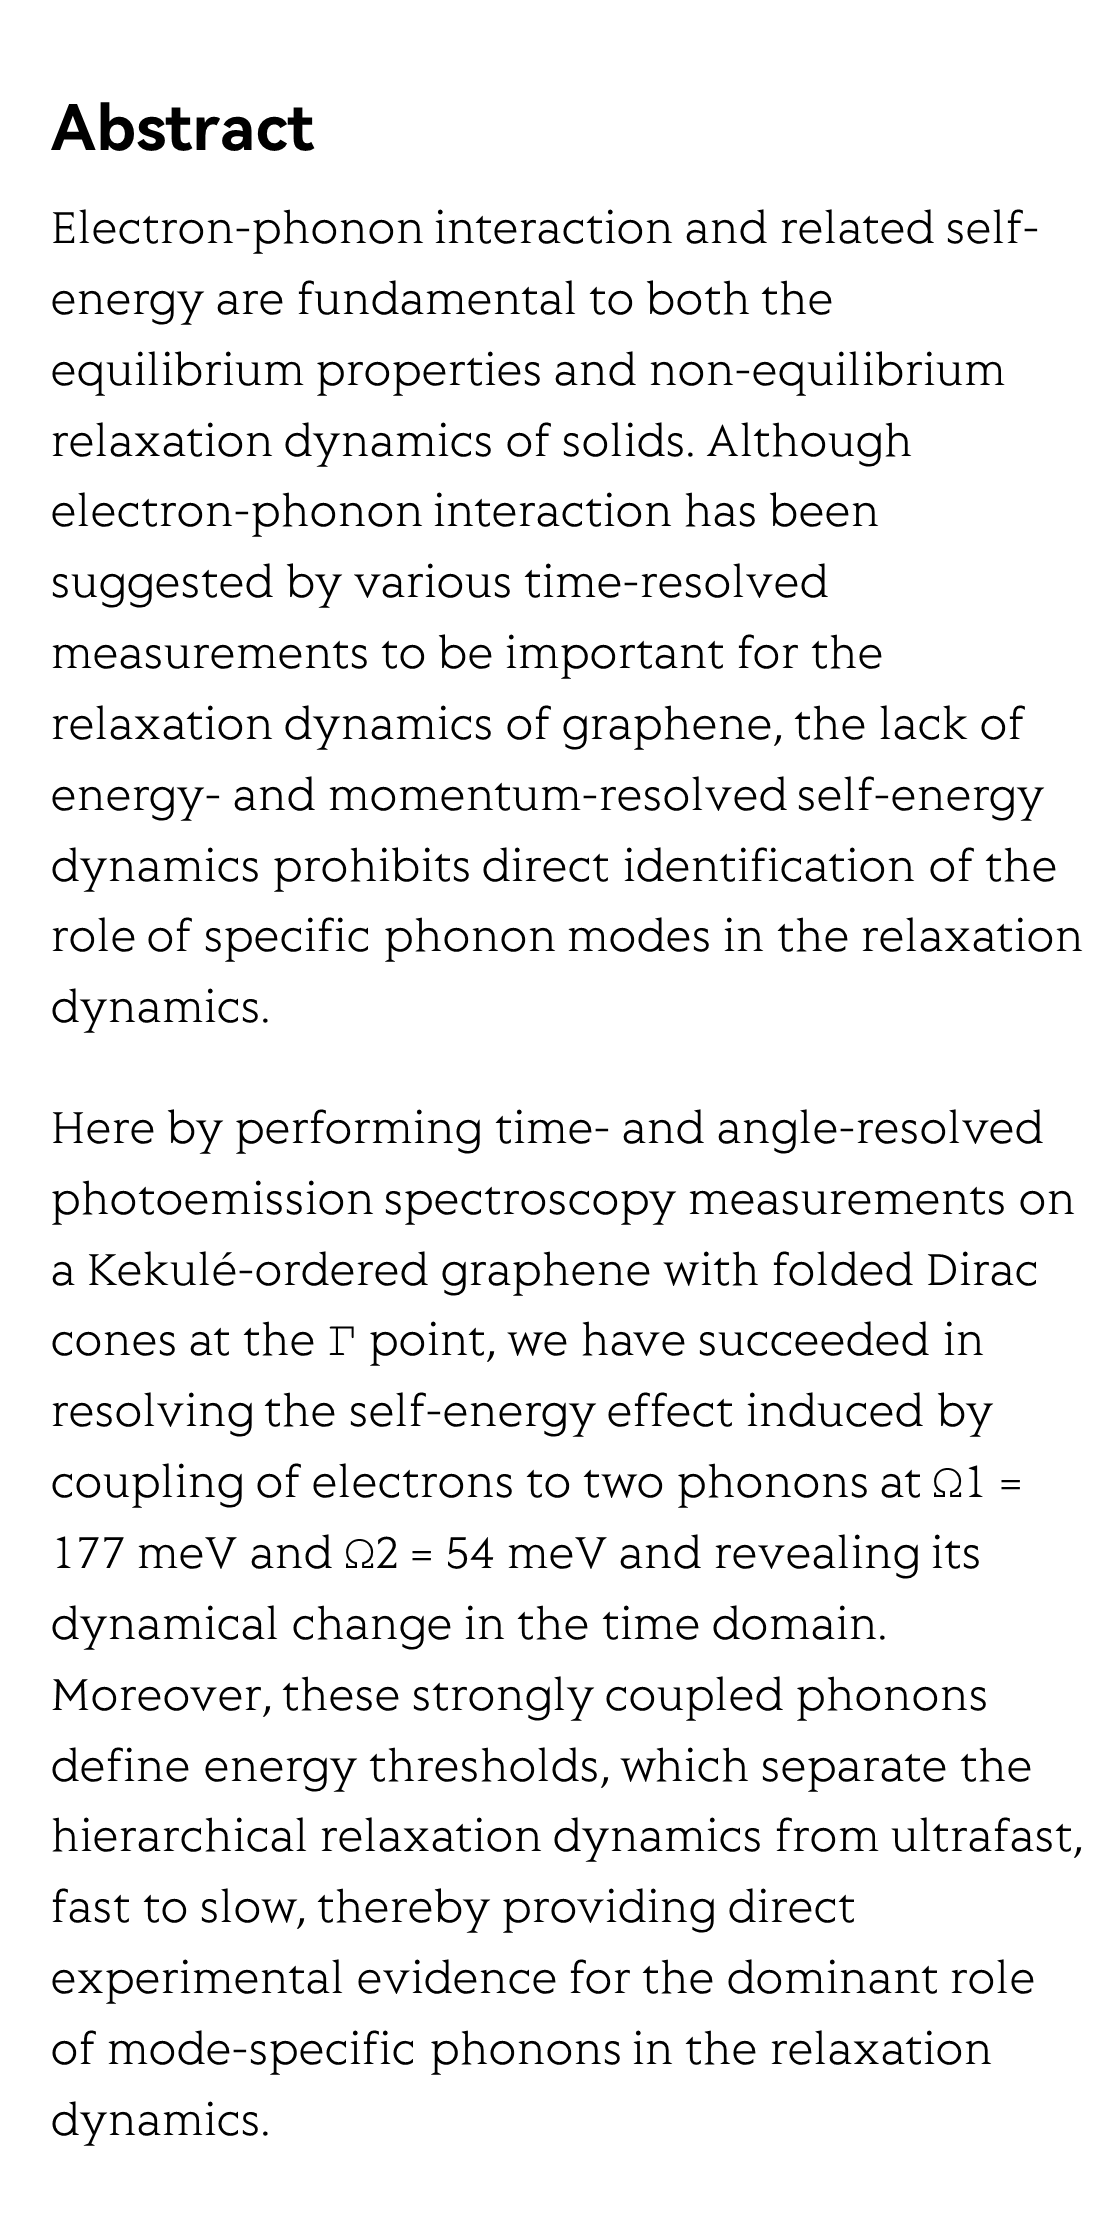 Self-energy dynamics and mode-specific phonon threshold effect in a Kekulé-ordered graphene_2